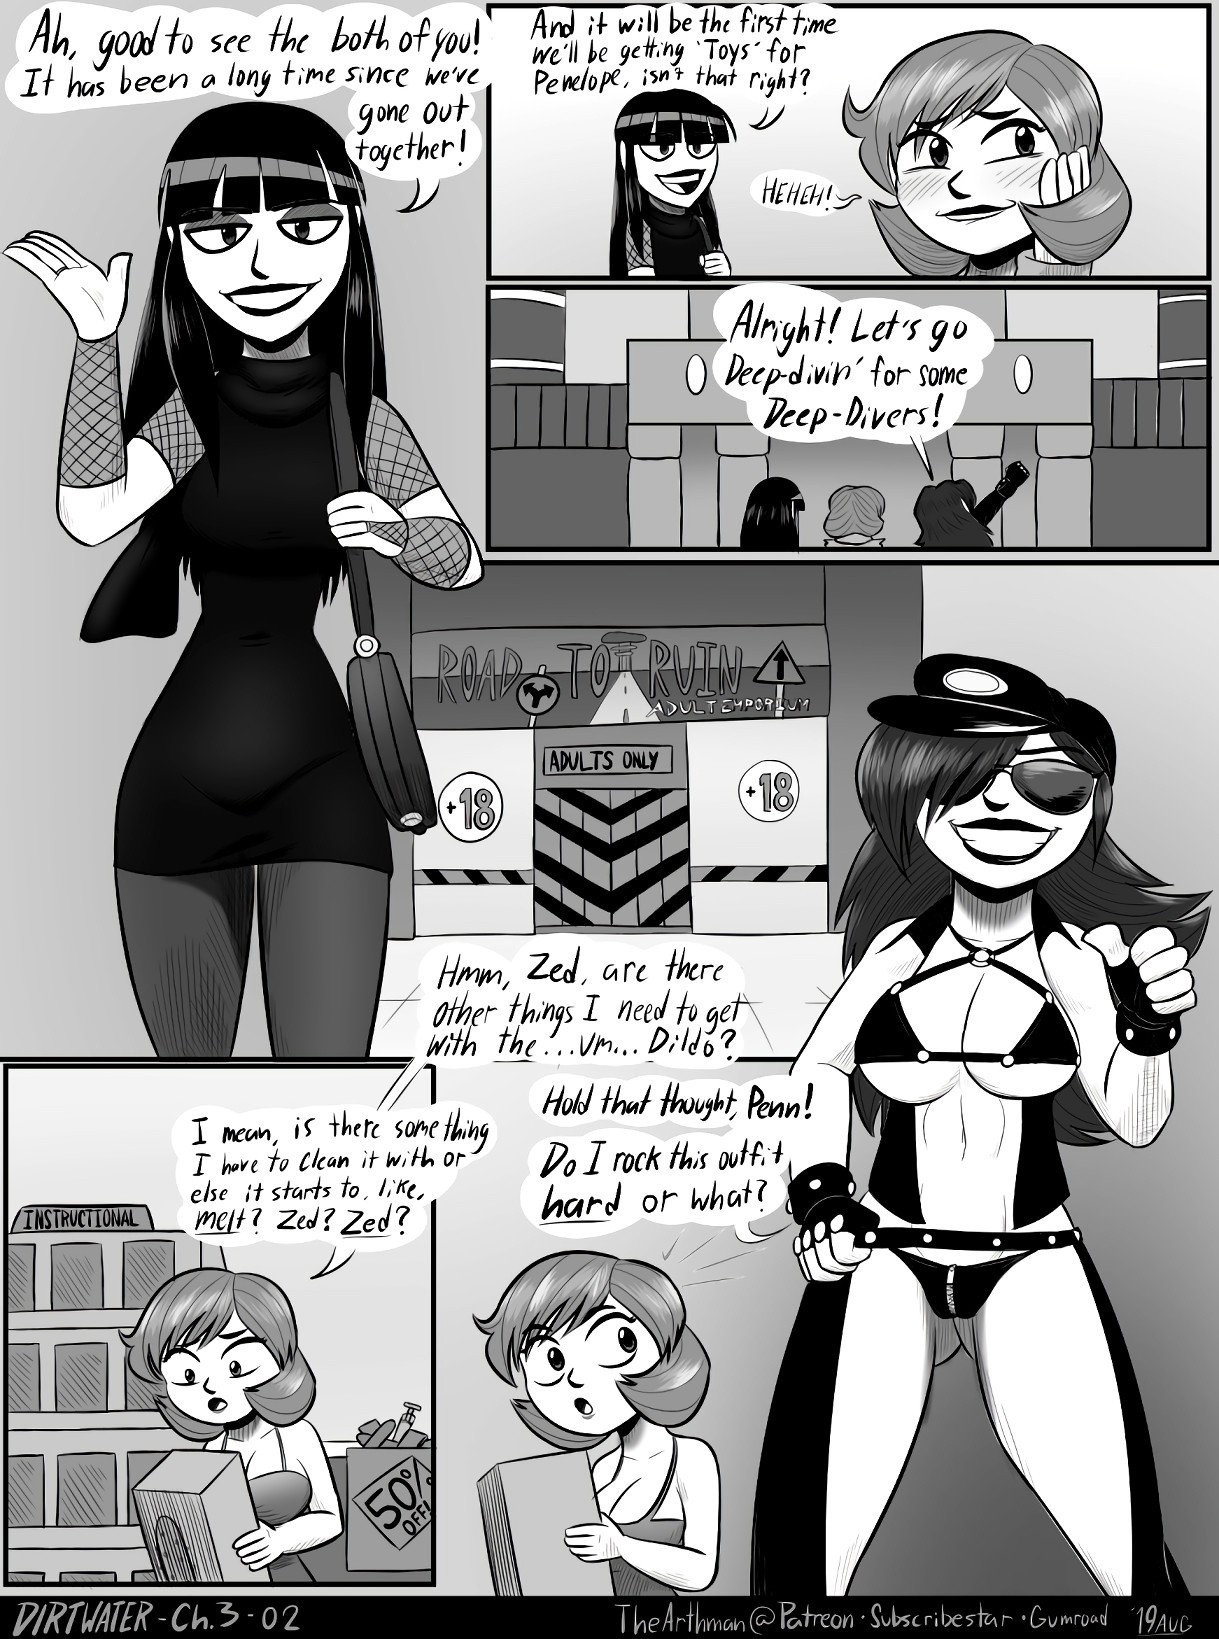 Dirtwater 3 - Dark Chambers porn comic picture 3